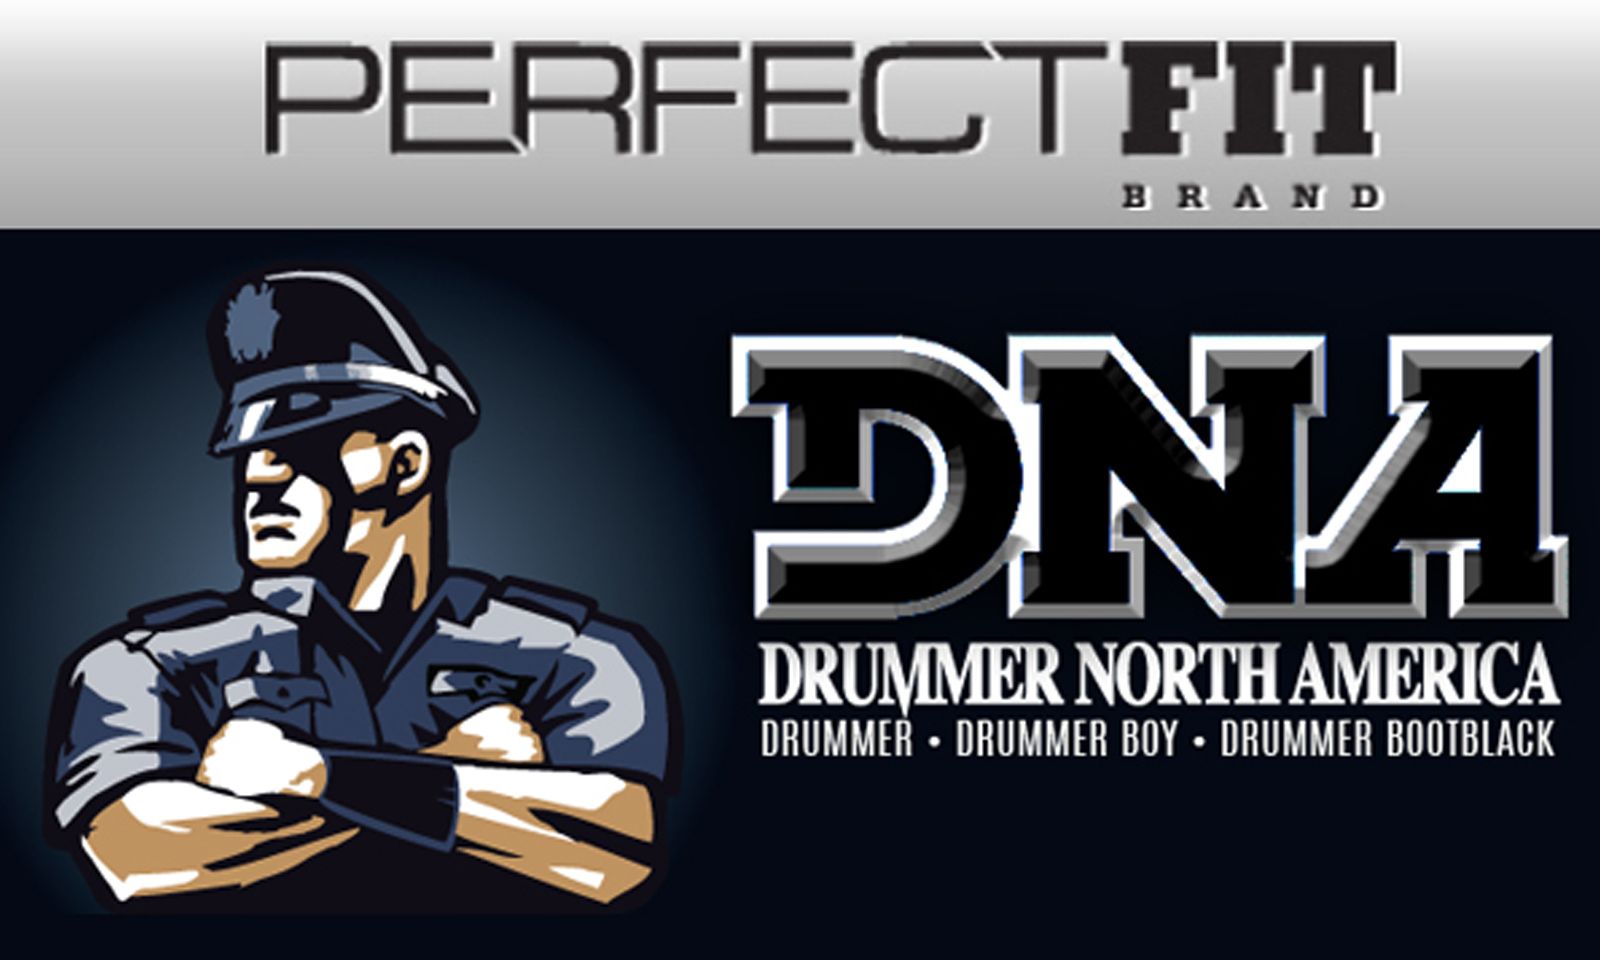 Perfect Fit Brand Sponsors 2017 Drummer North America